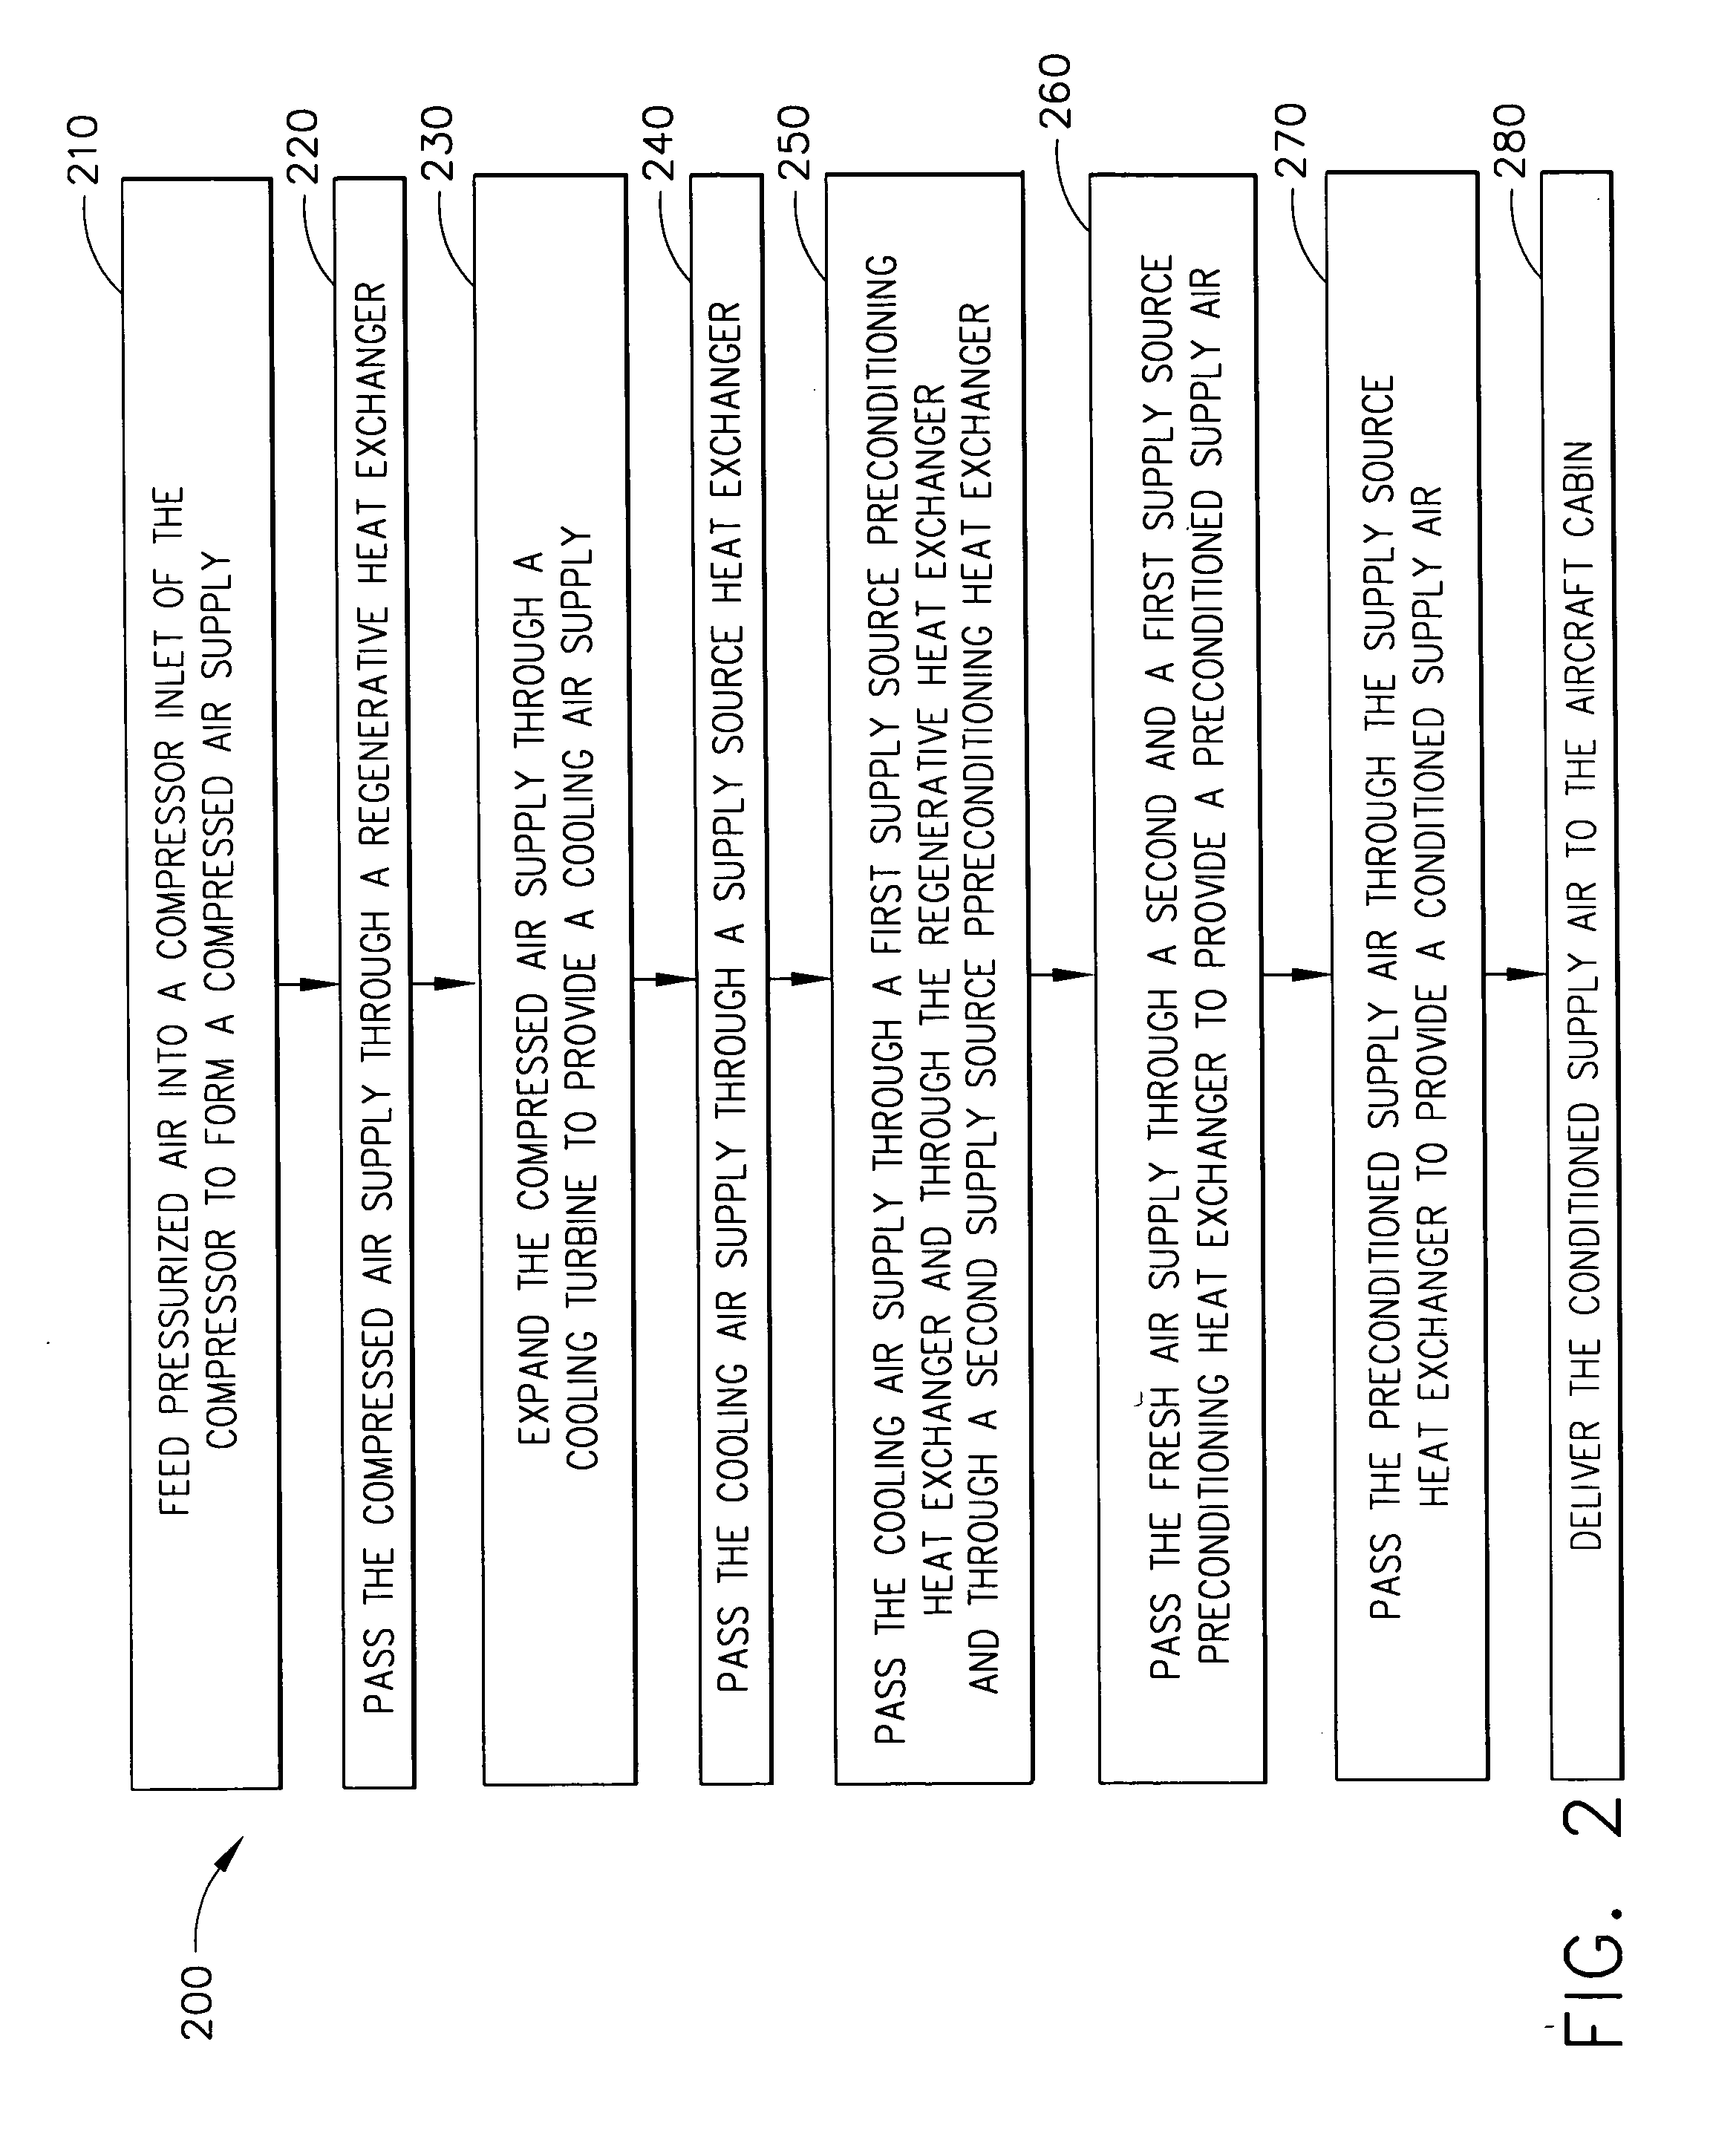 Indirect regenerative air cycle for integrated power and cooling machines